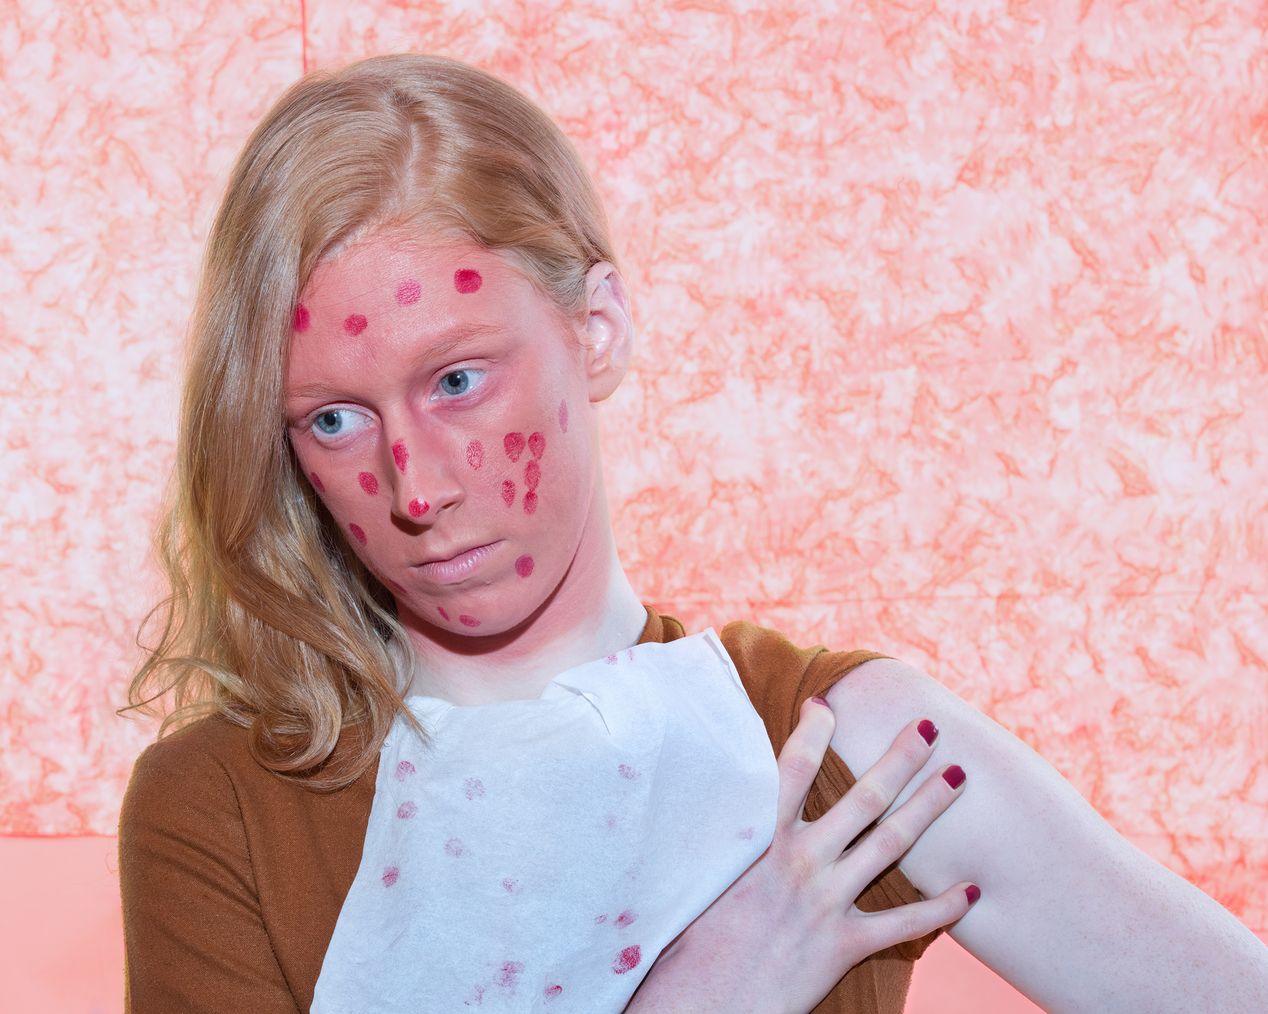 Model's face is covered with pink paint and red dots, art photography, Ilona Szwarc, contemporary Los Angeles artist.